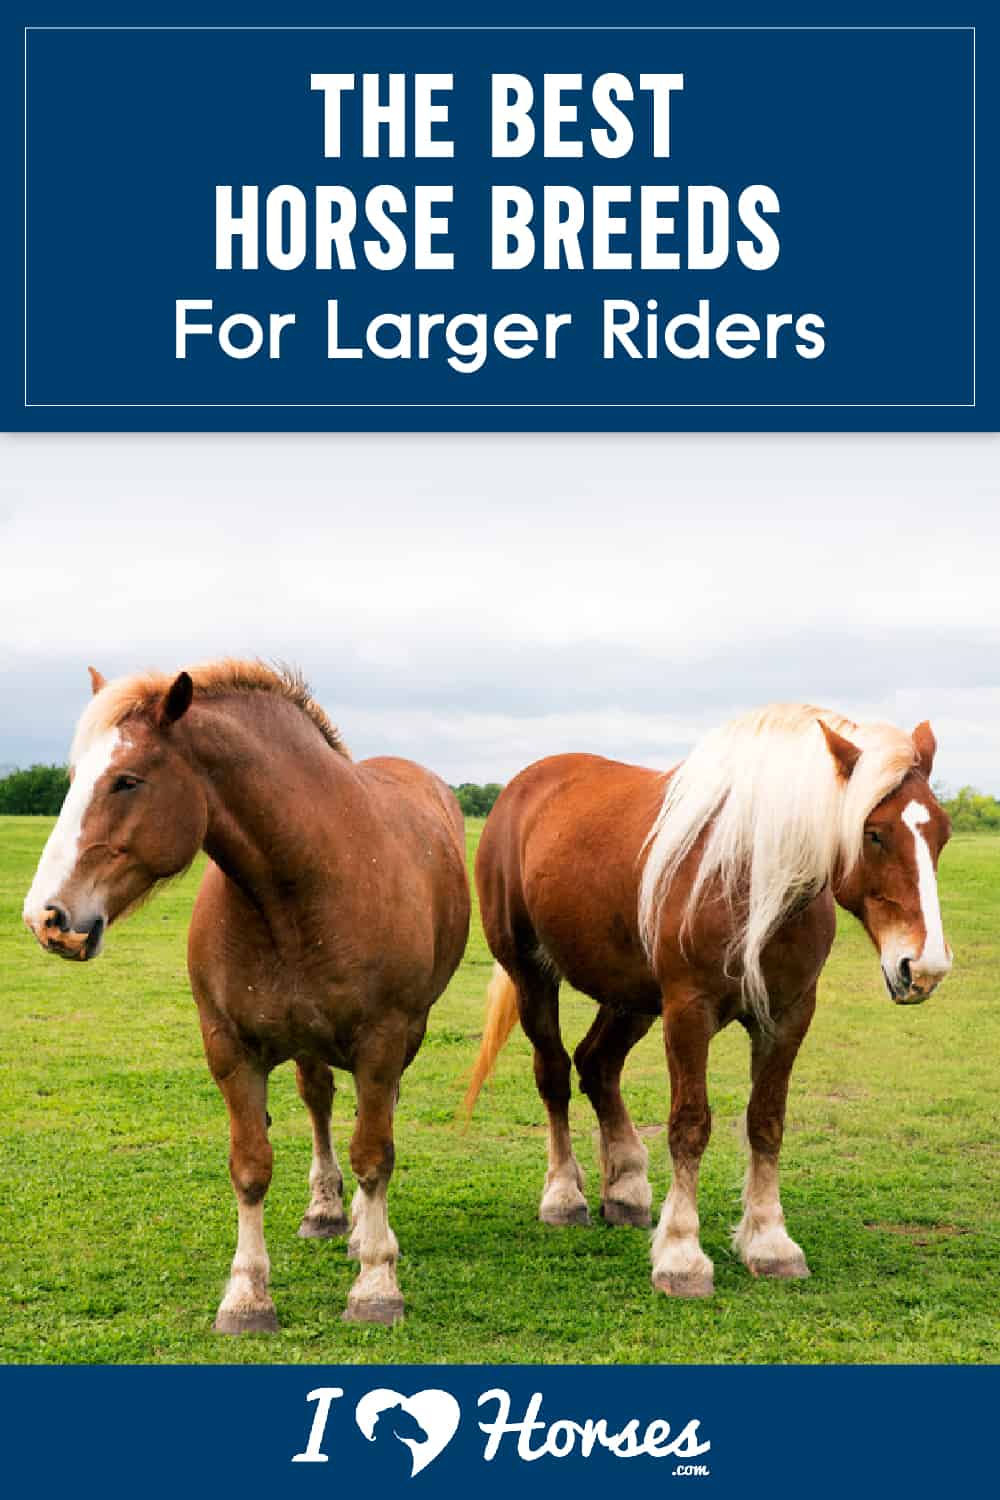 The Best Horse Breeds For Larger Riders